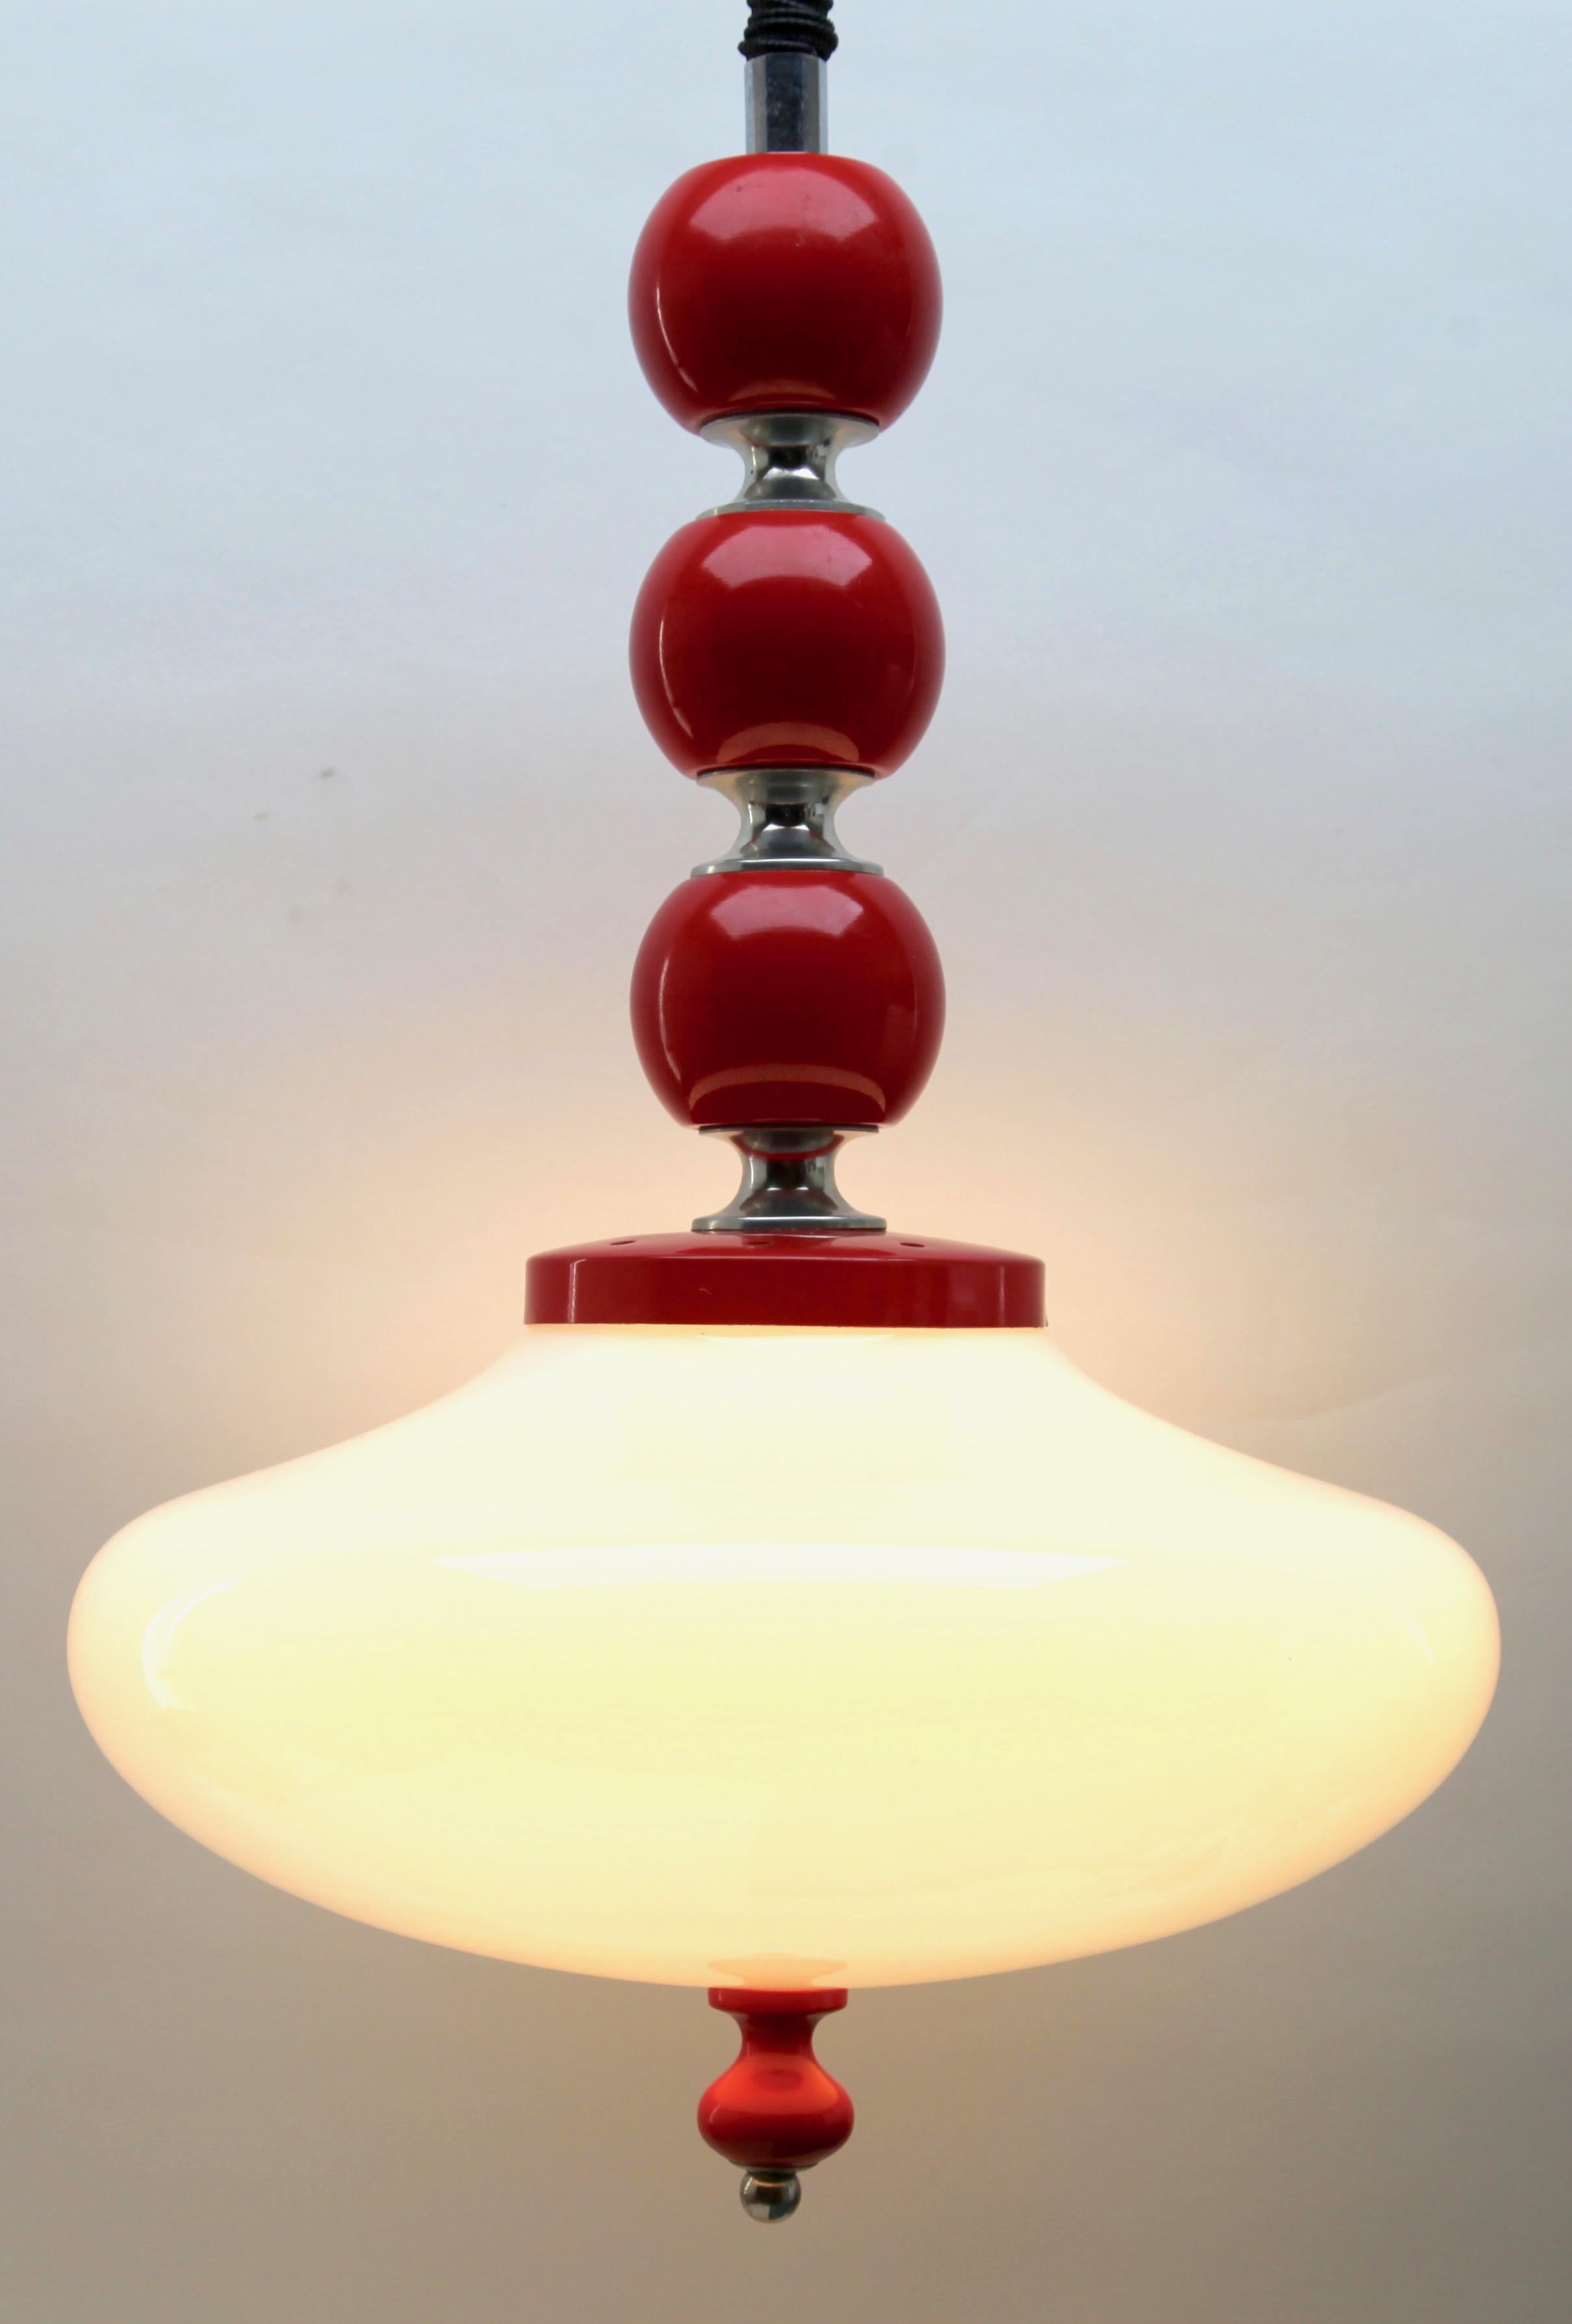 Opaque glass Art Deco pendant ceiling light with glass shade and 2 fittings E14.
This simple 'hanging' shape and reflects a soft light over a wide area.
Adjustable in height by pulling lamp up or down 

In excellent condition and in full working